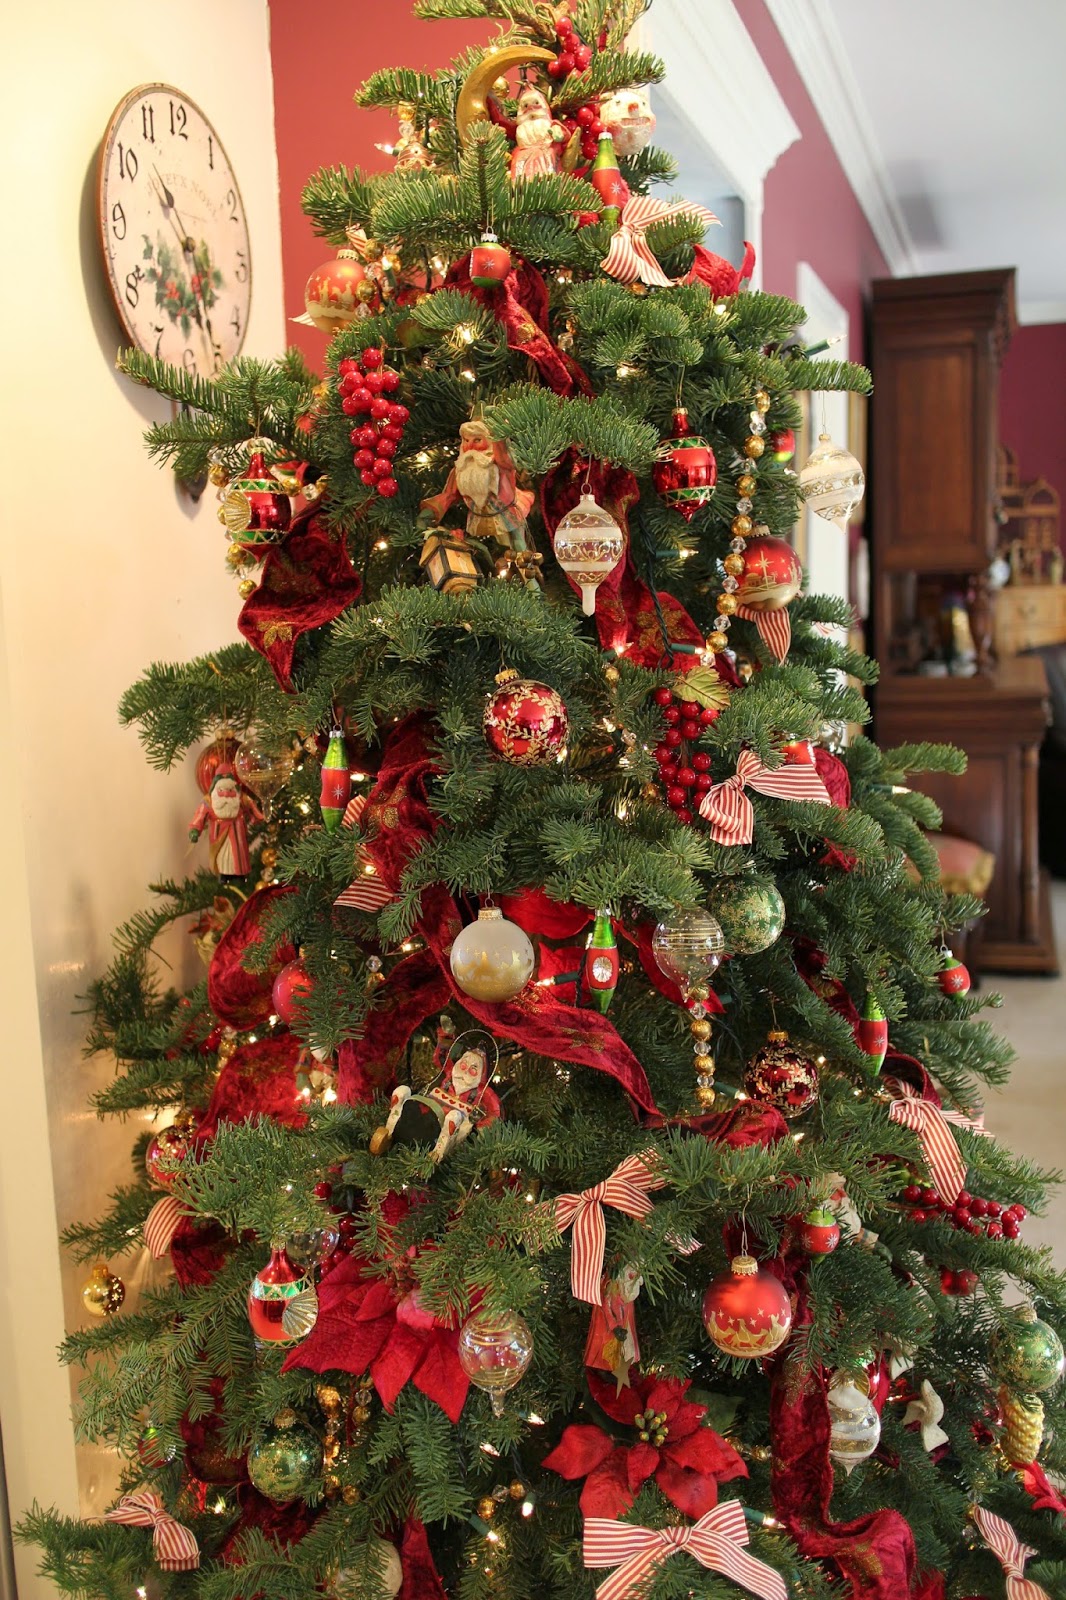 Sunday View: Decorating for Christmas